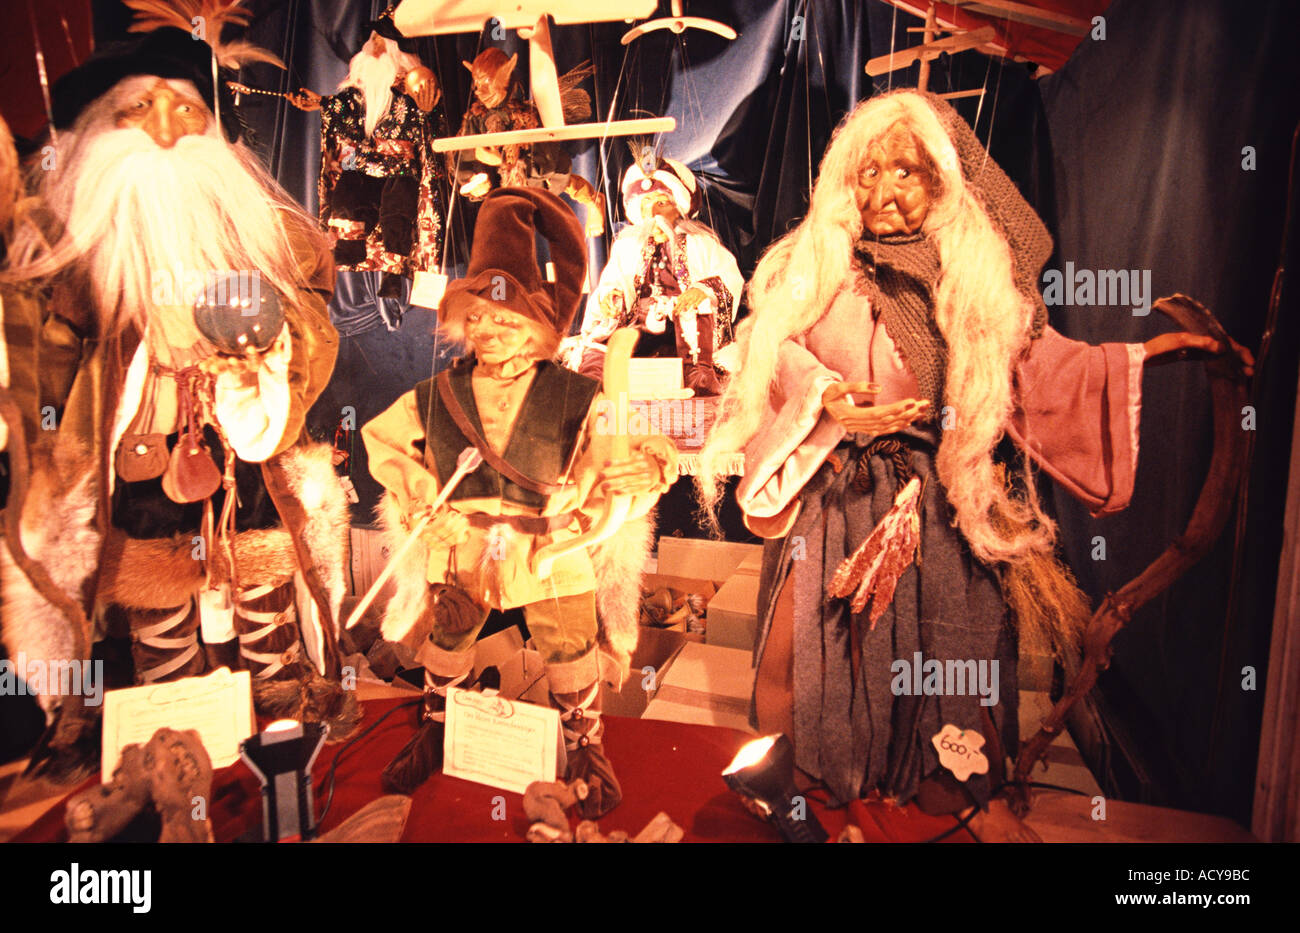 Germany Cologne Koeln chistmas market wooden puppets witches dwarves Stock Photo